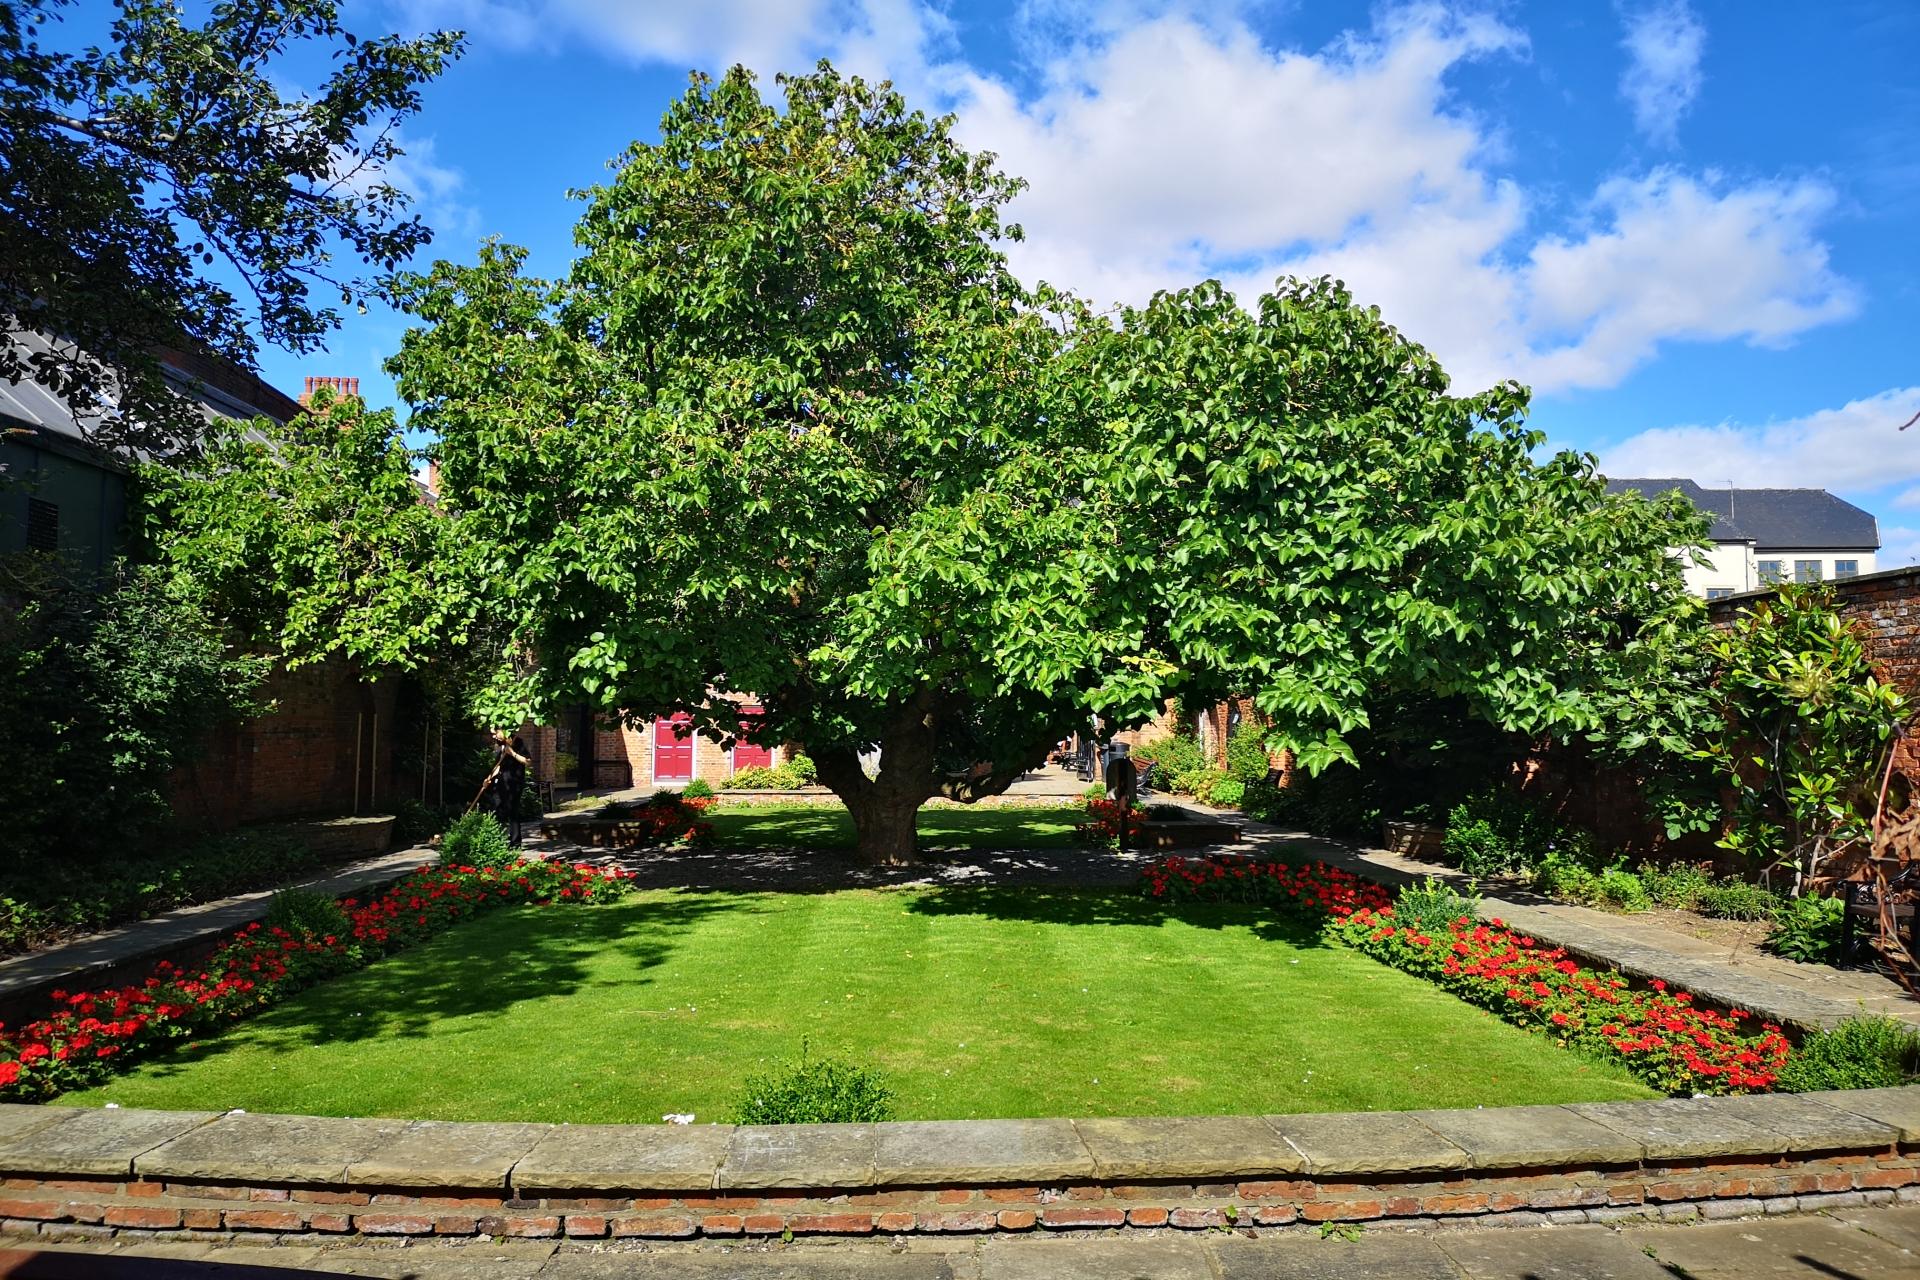 A garden with a large tree in the centre